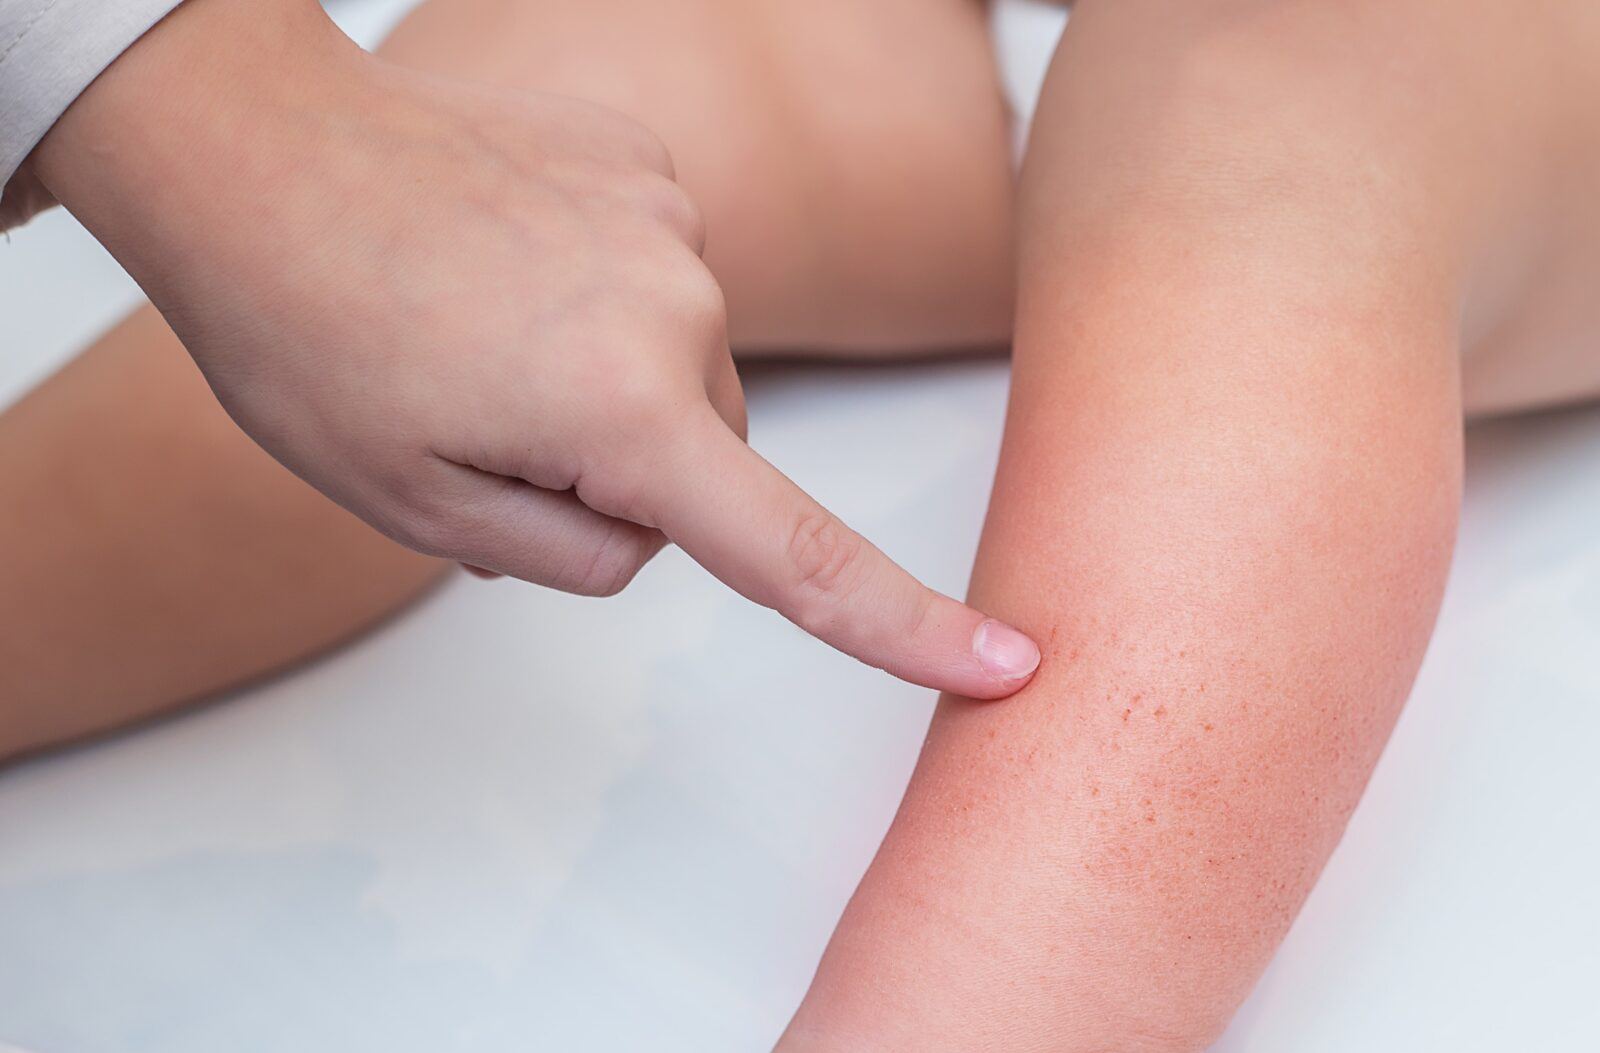 doctor pointing to skin irritation on the leg